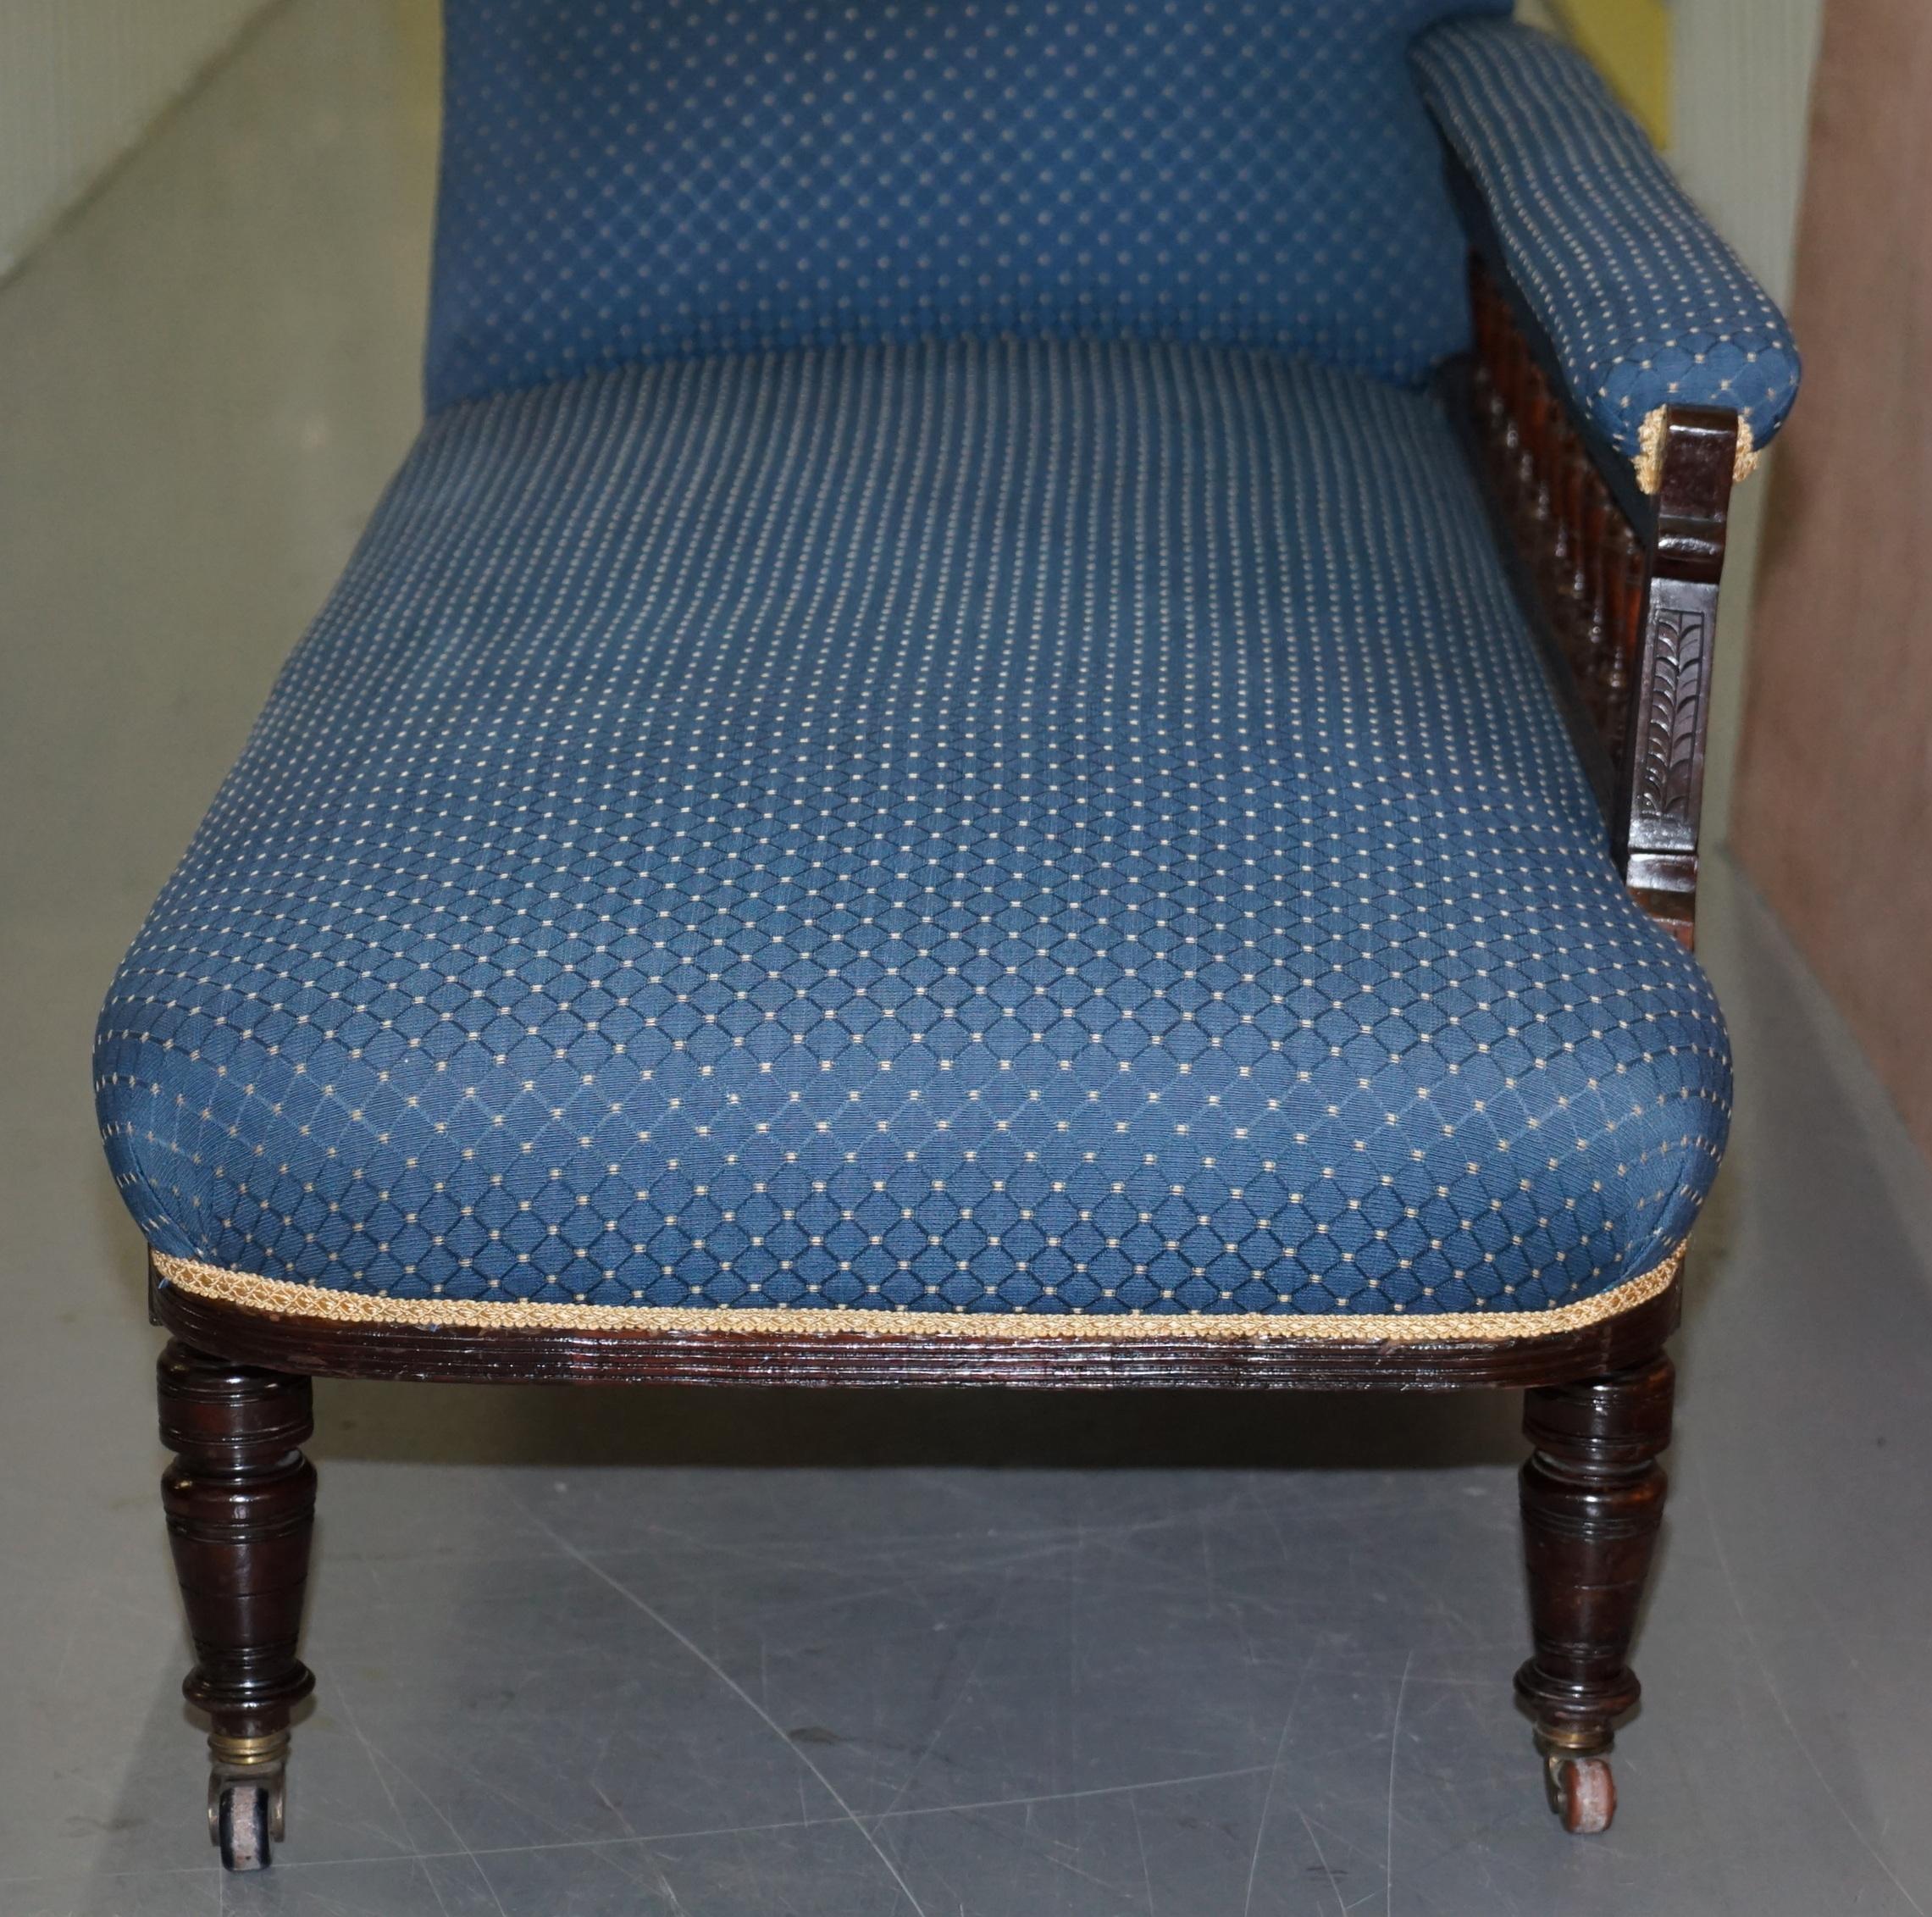 Lovely Early Victorian Carved Hardwood Chaise Lounge Regency Blue Upholstery 2